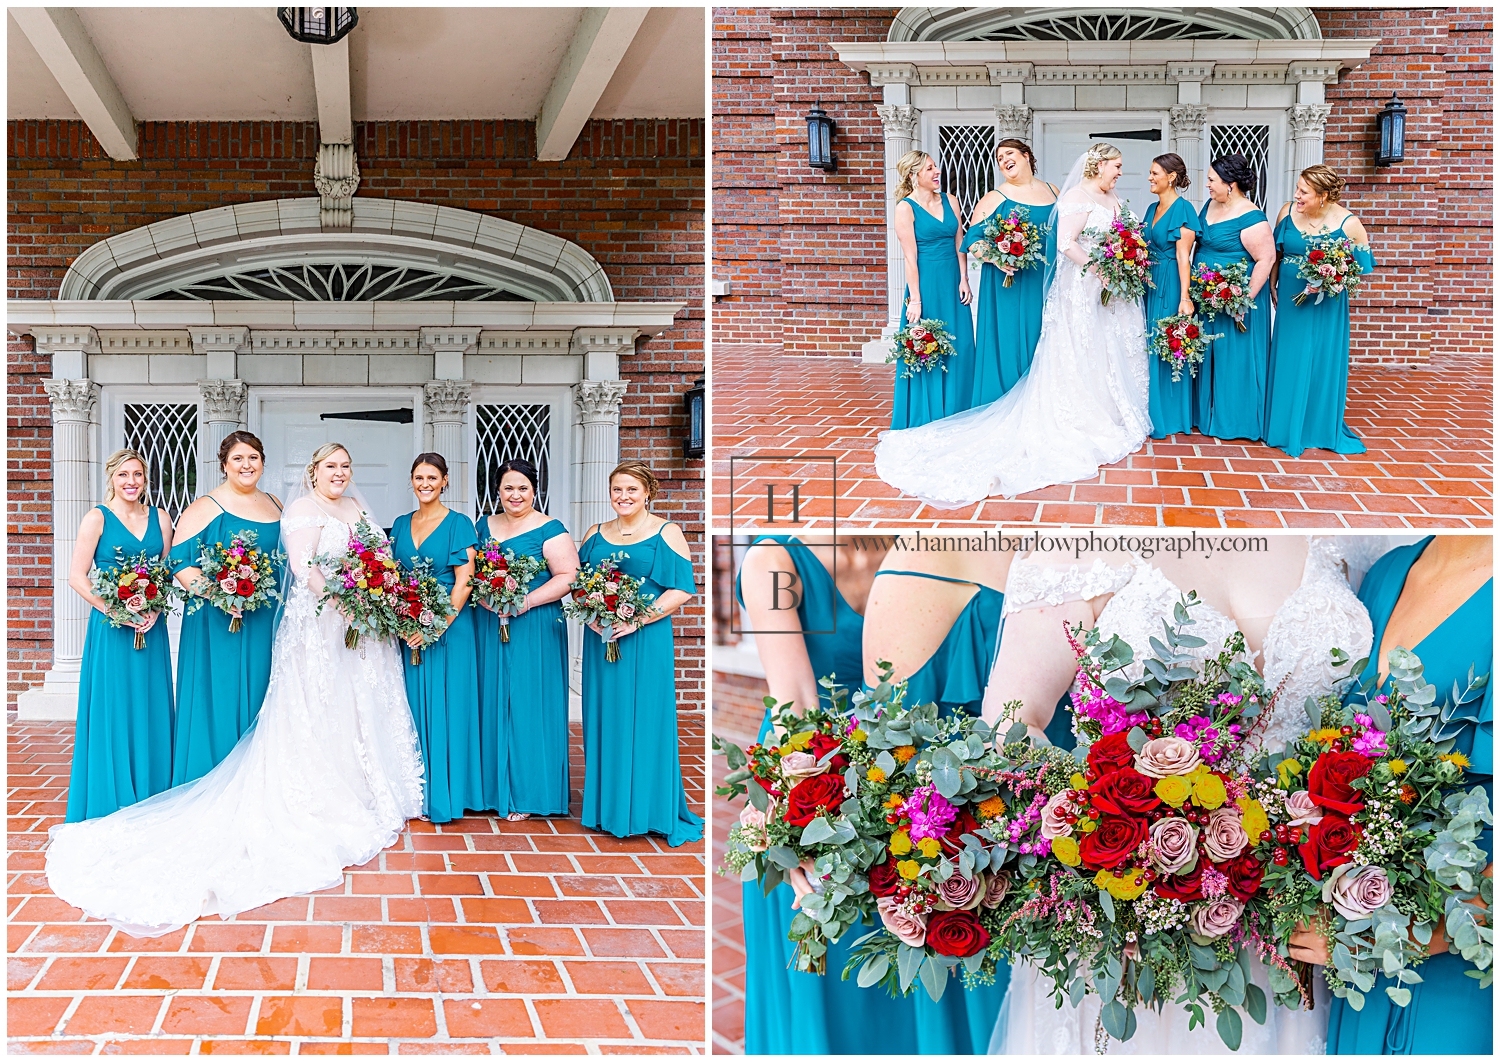 Bride and bridesmaids in teal dresses posing for photo